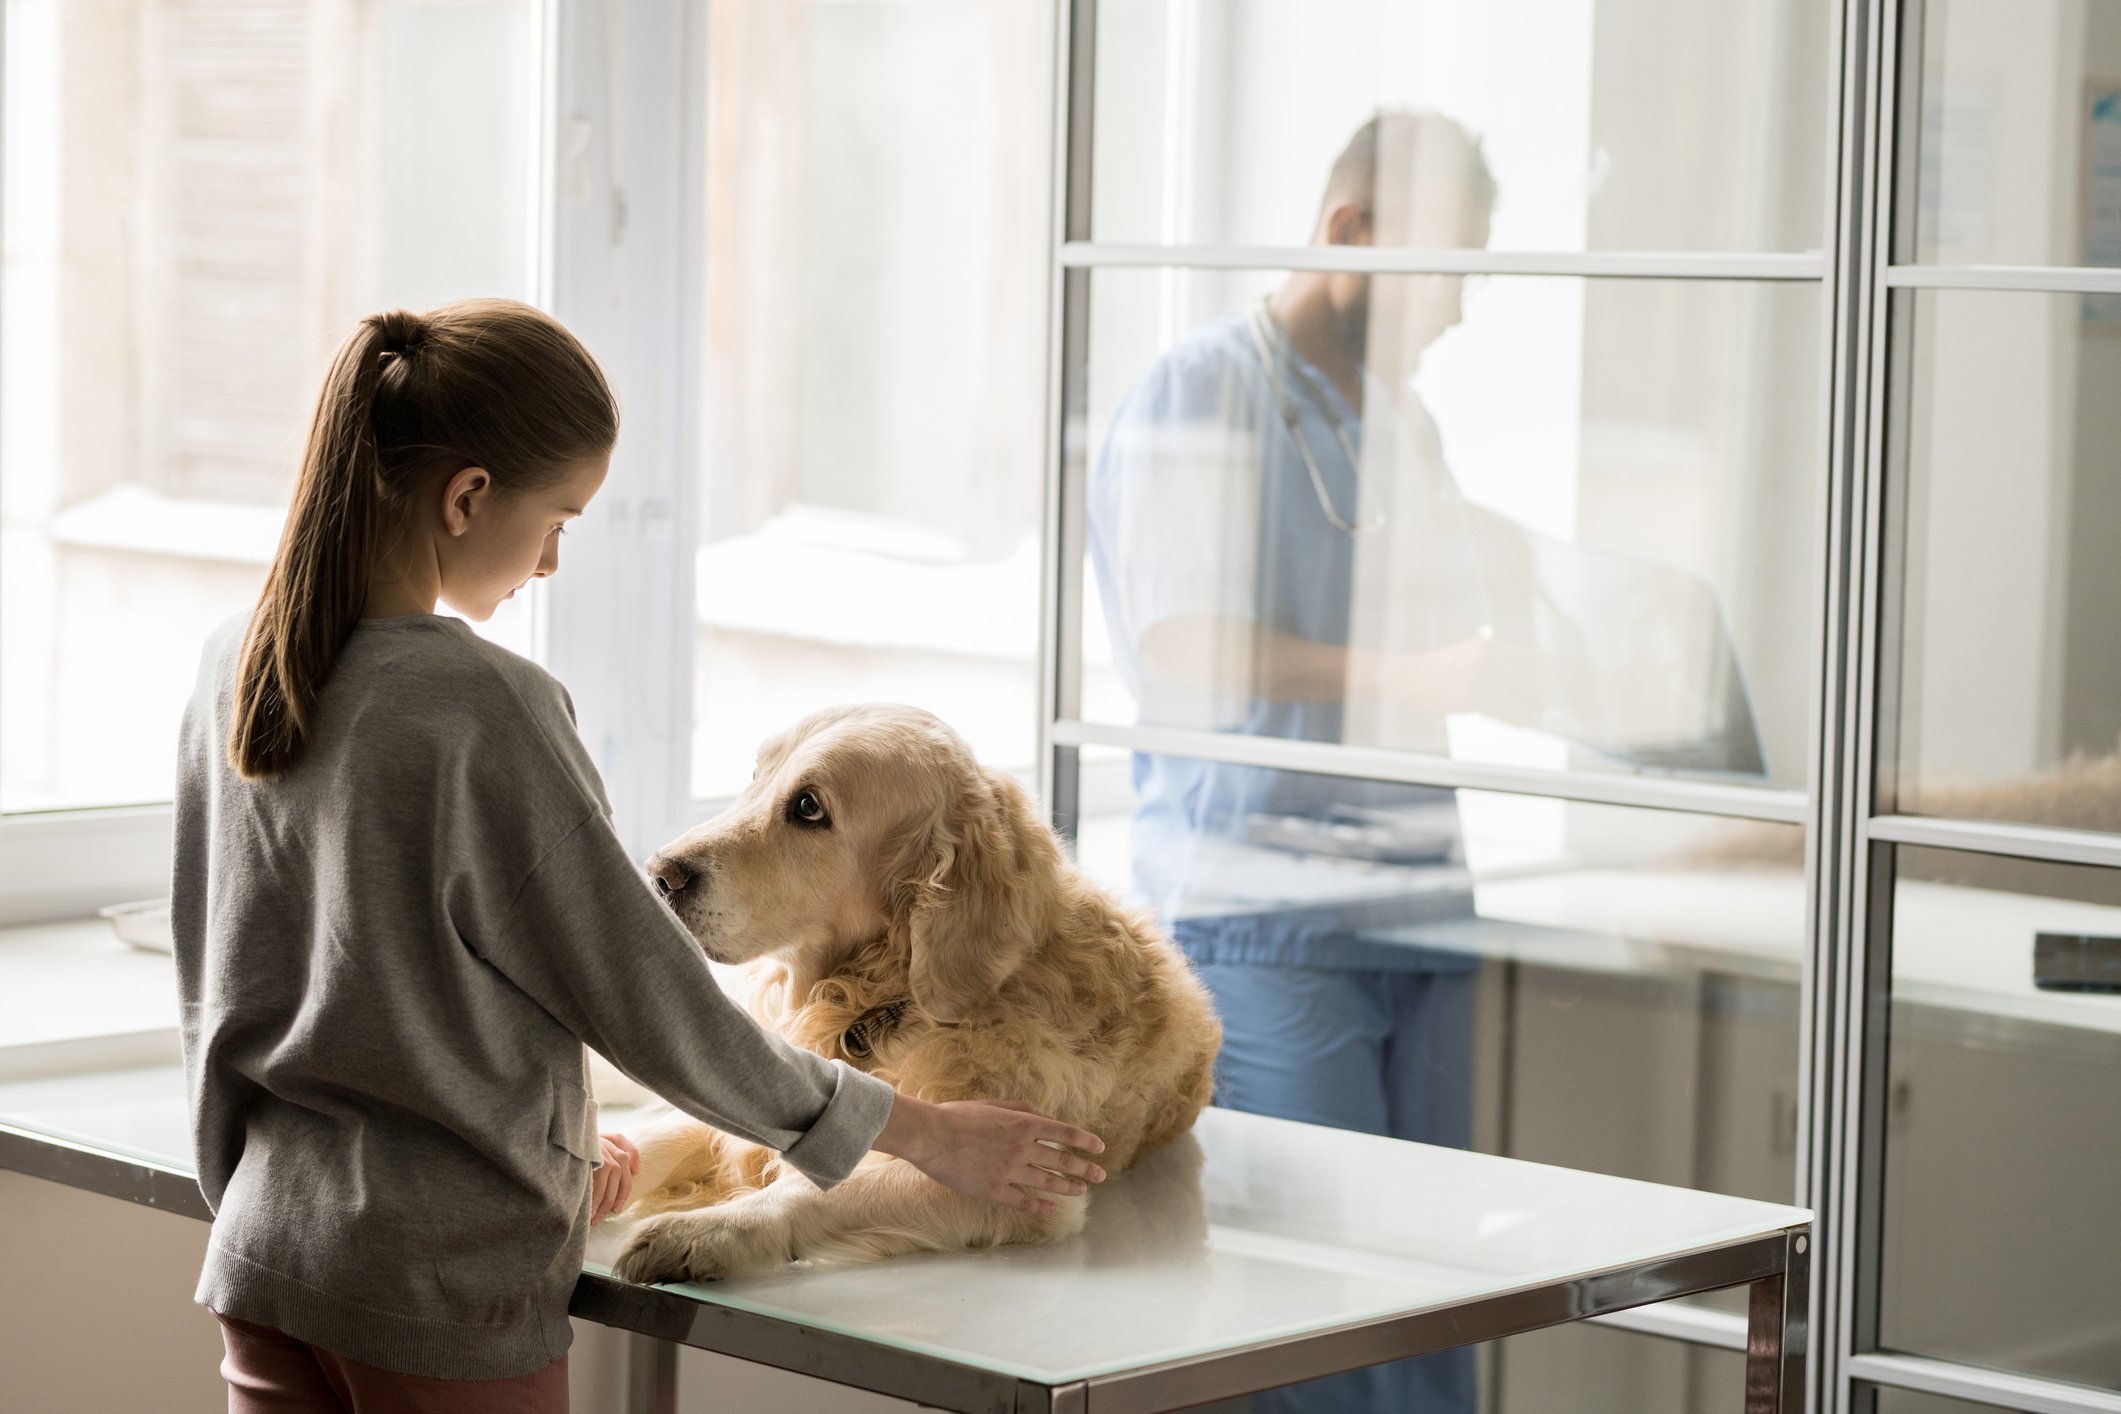 A pet owner comforts her old golden retriever on the vet's examining table